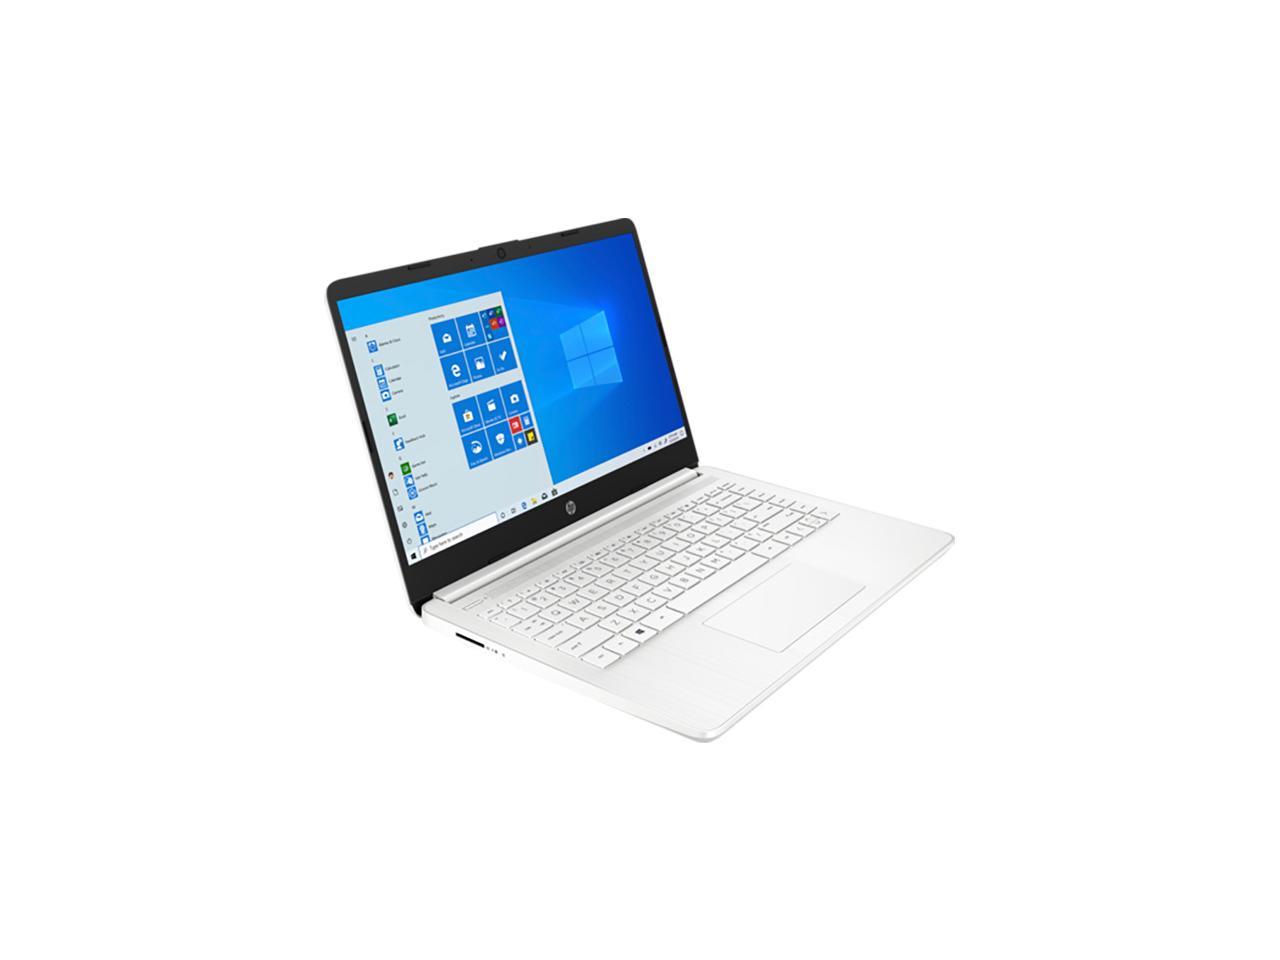 Hp 14Z Home And Business Laptop Snow White (Amd Amd 3020E 2-Core, 32Gb Ram, 2Tb Pcie Ssd, 14.0" Hd Me-10013226785